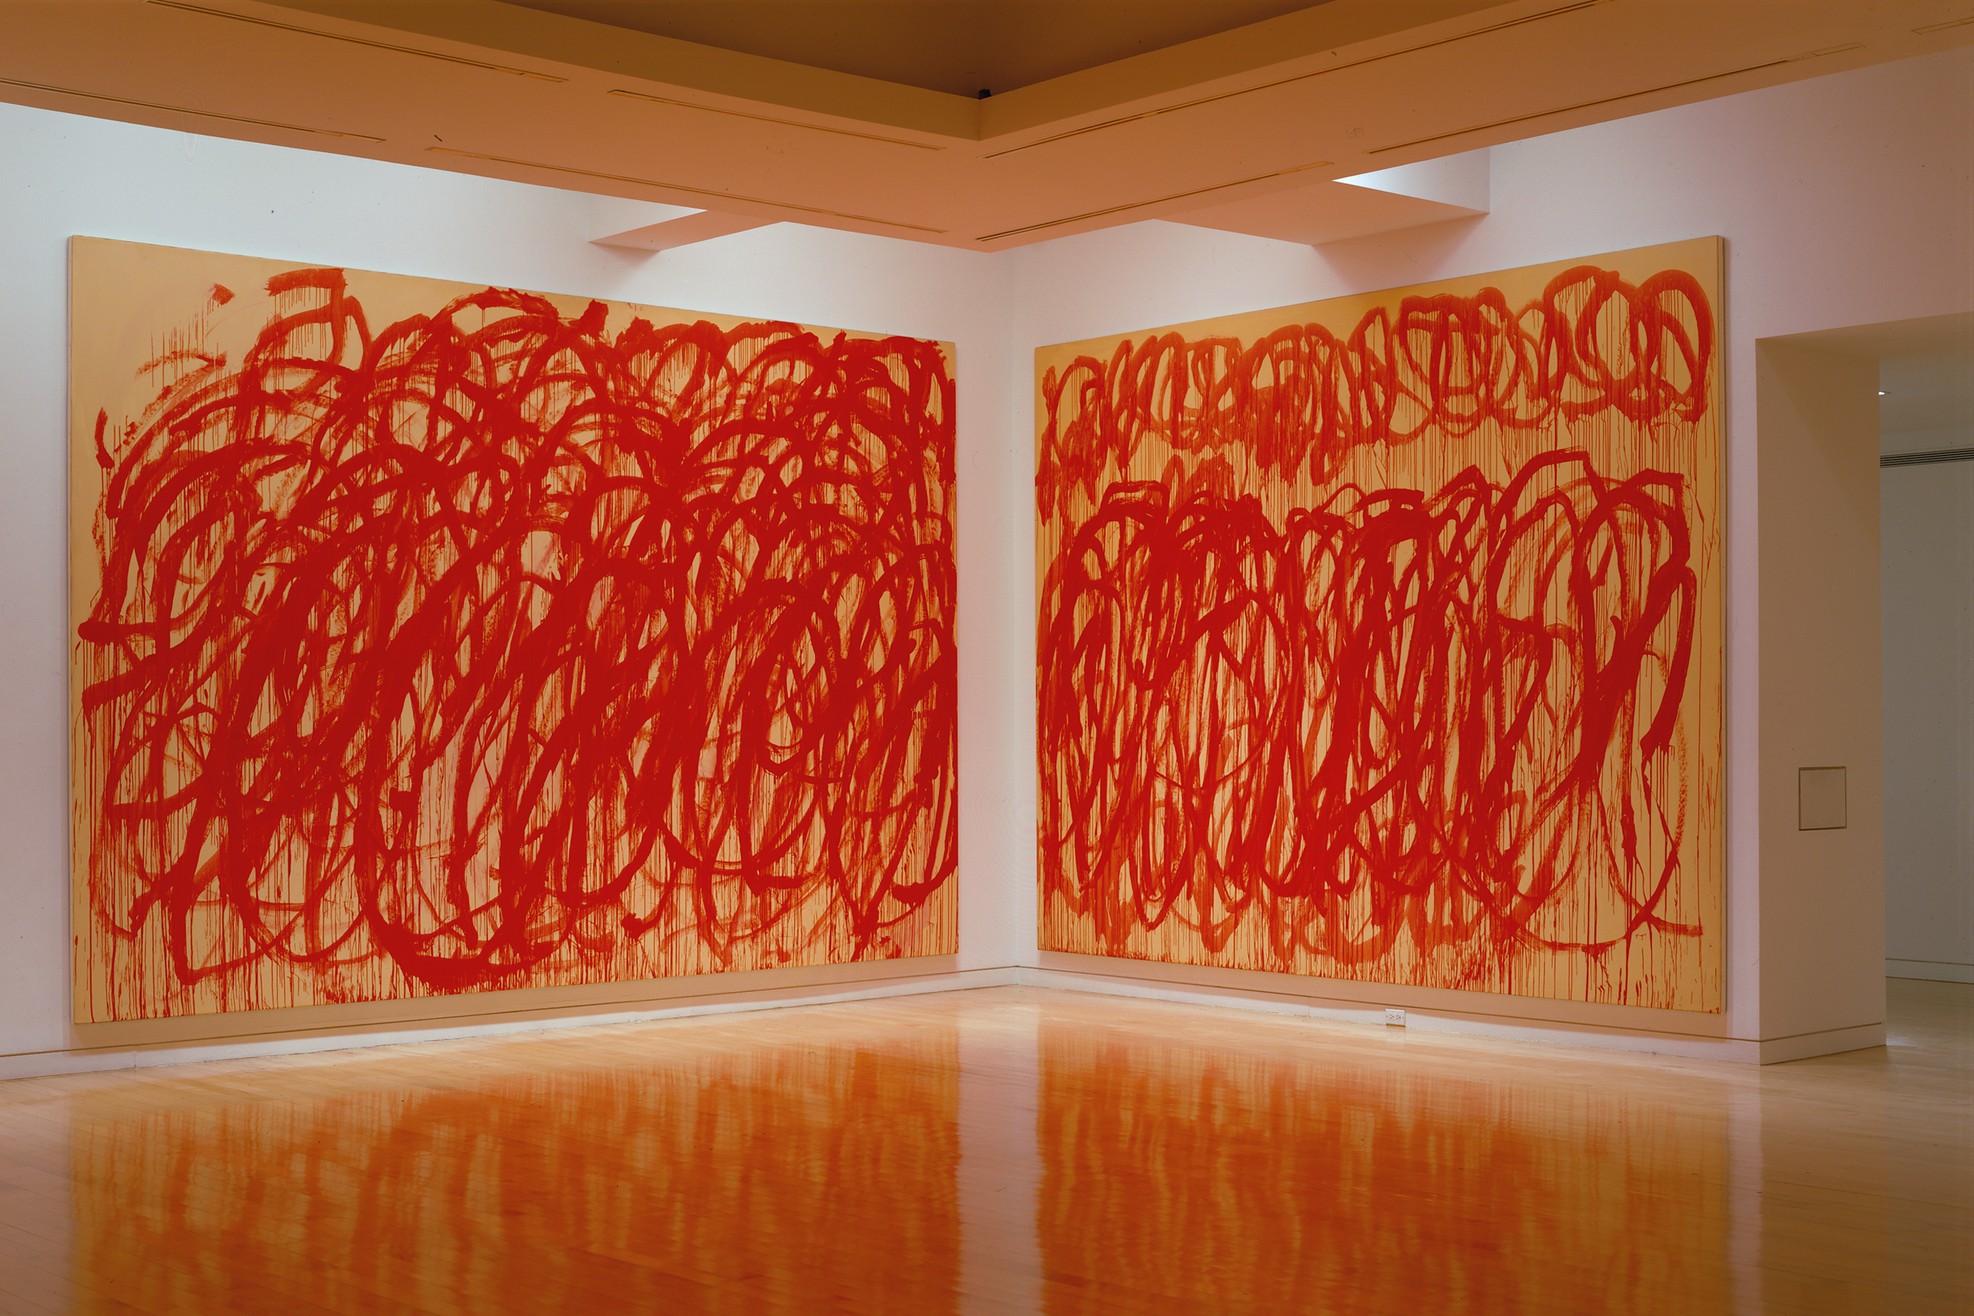 Cy Twombly Bacchus, 980 Madison Avenue, New York, November 2December